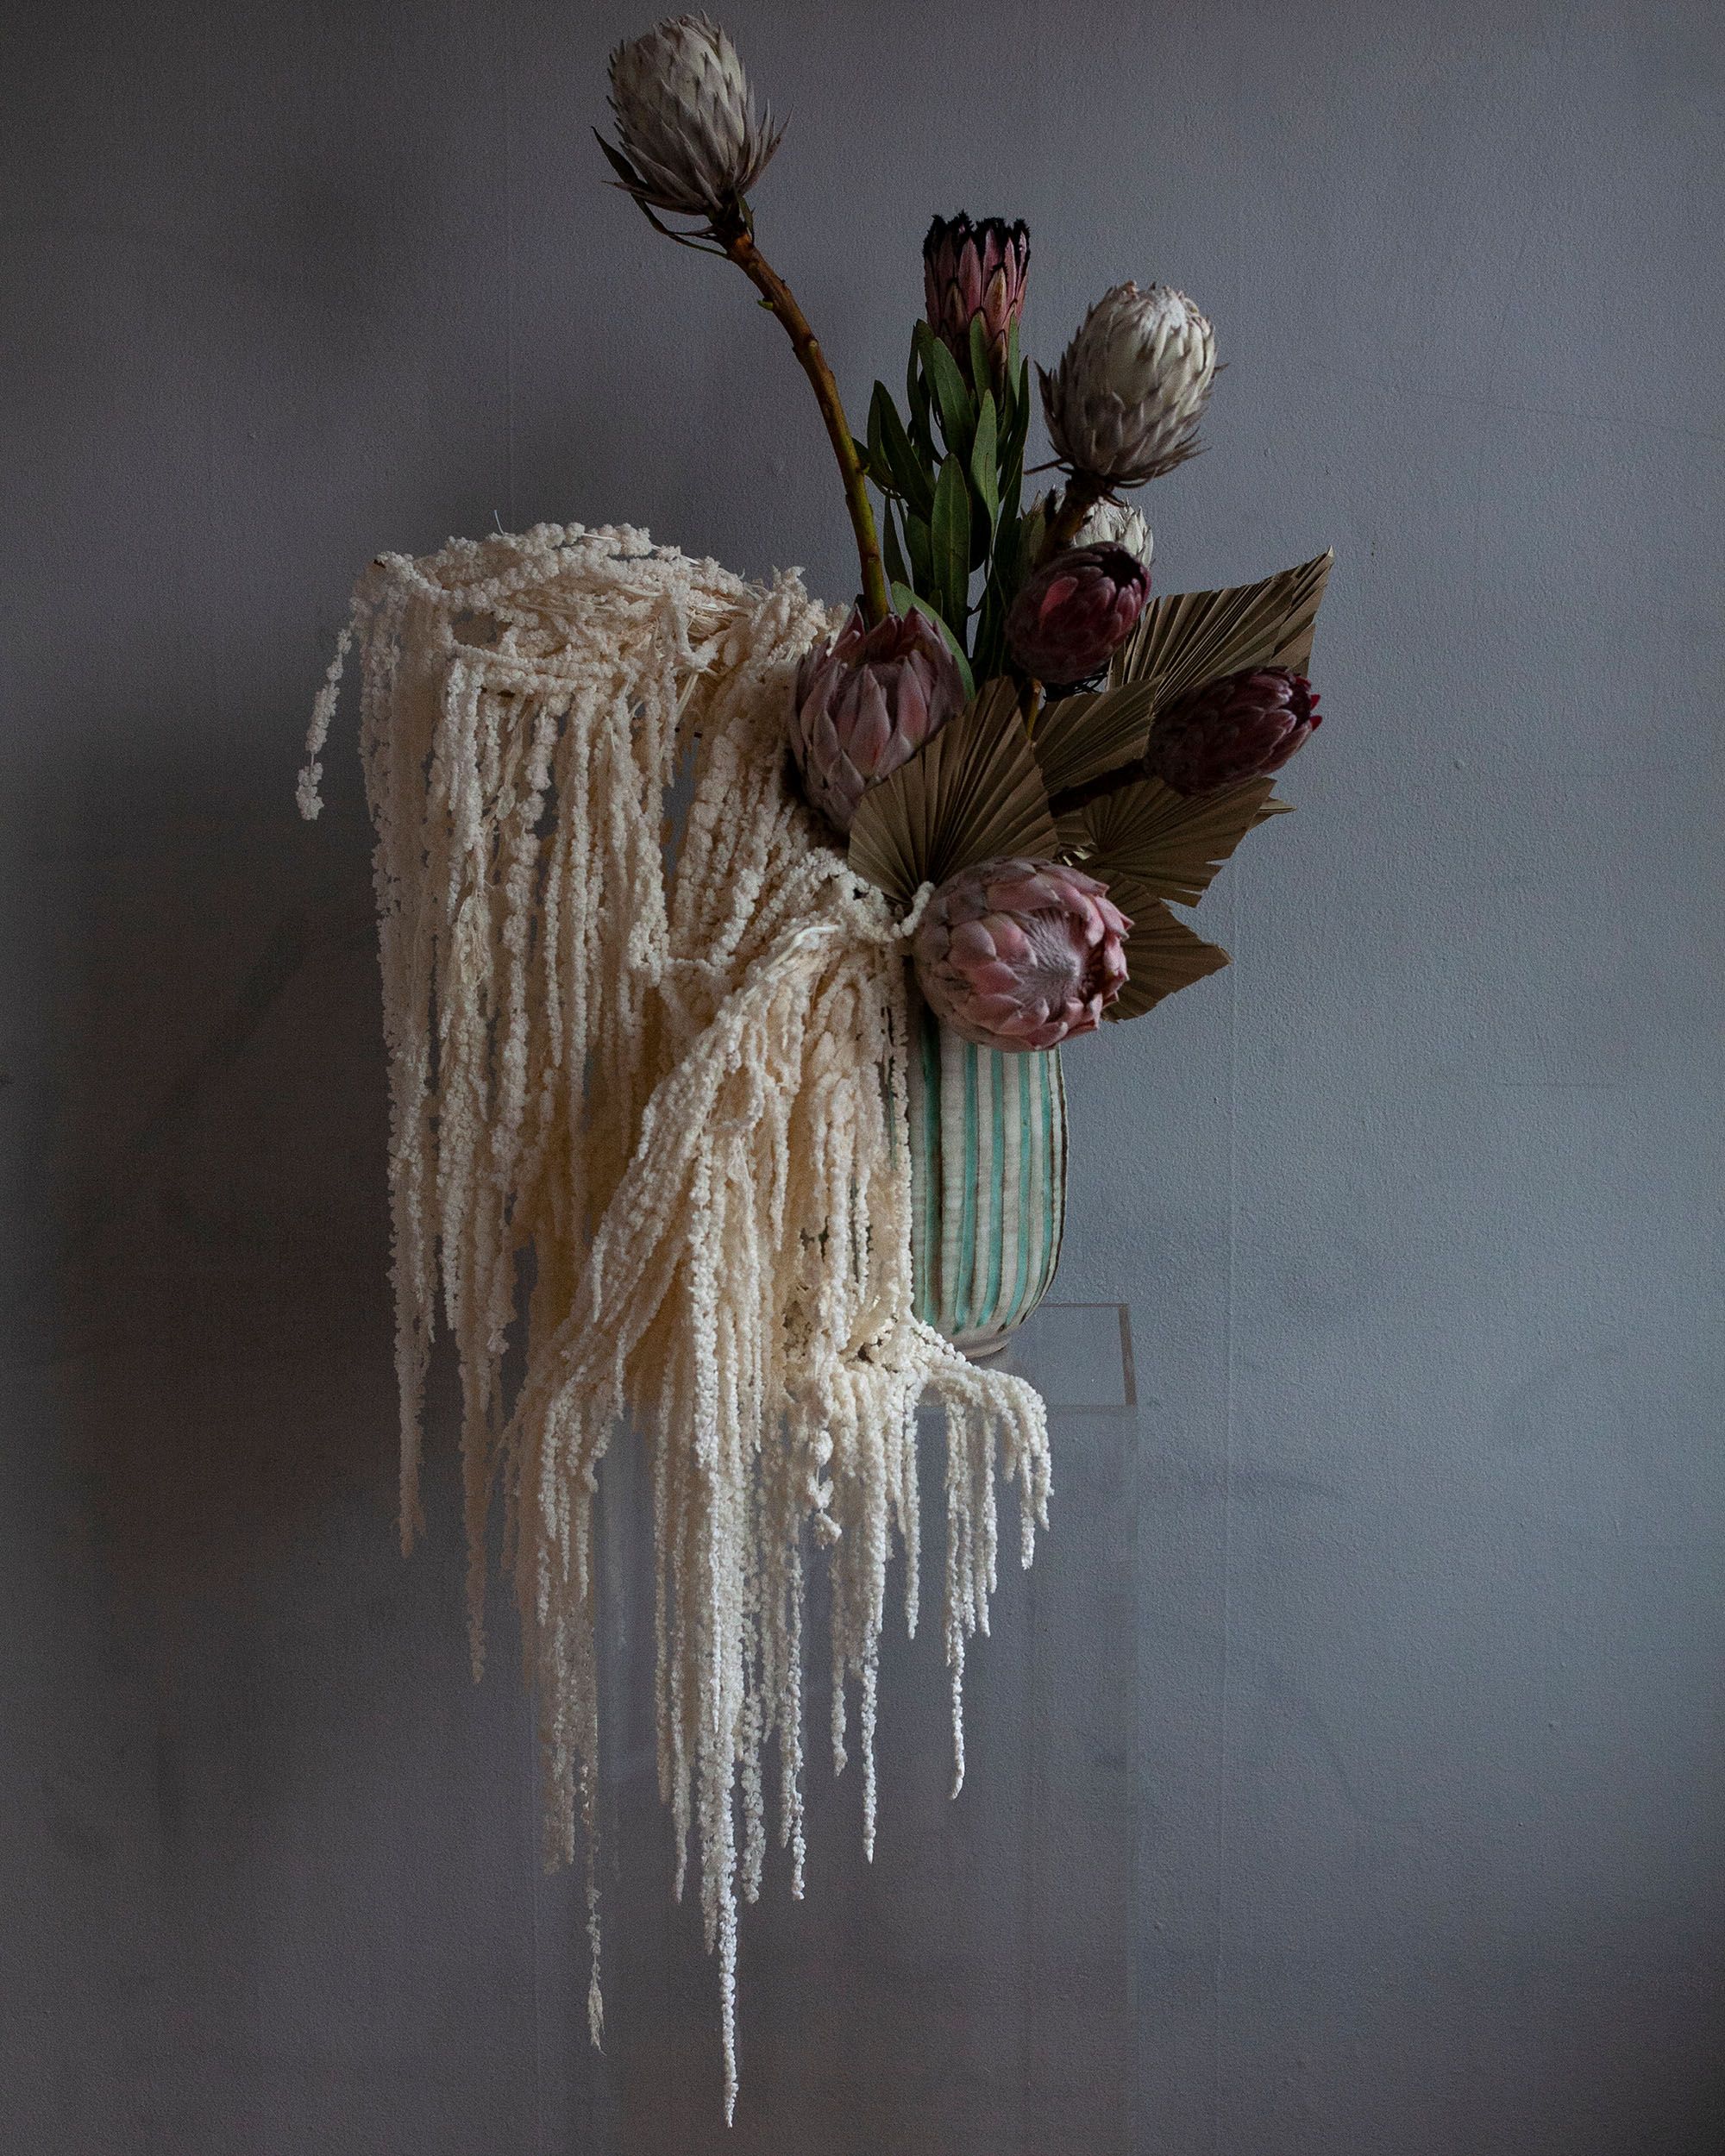 The Best Dried Flowers for Your Home Decor - Dried Flower Arrangements